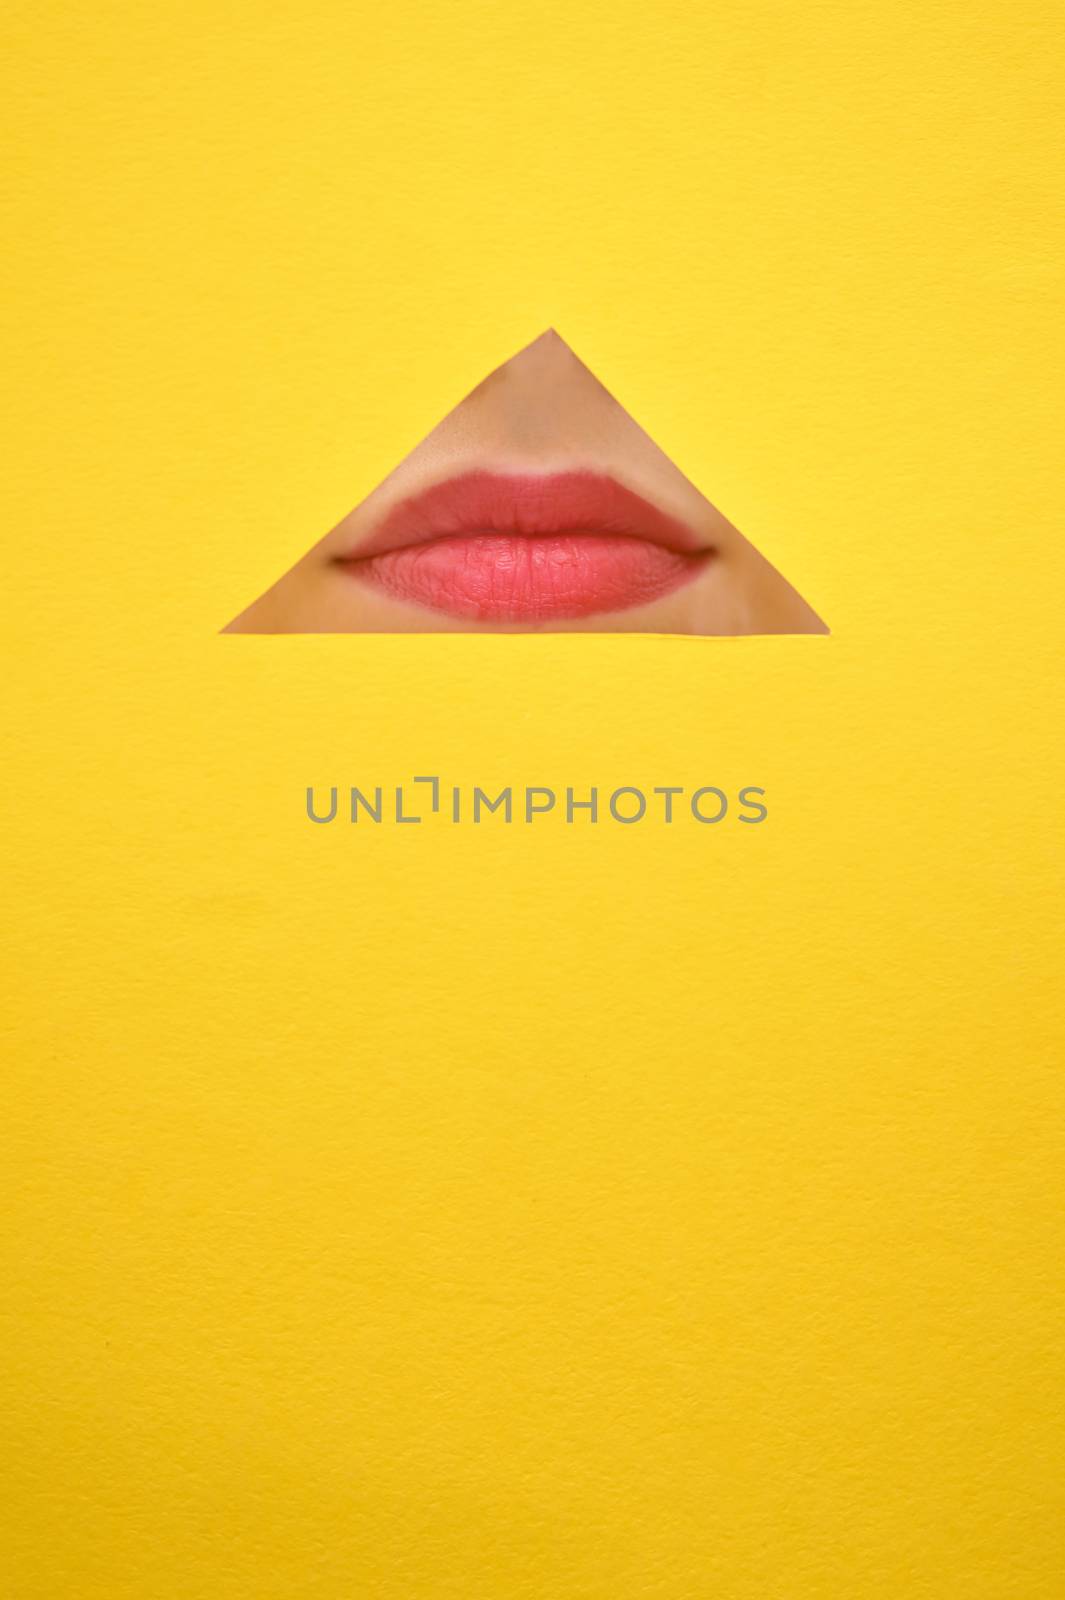 Lips, Body Part In A Triangle by mady70